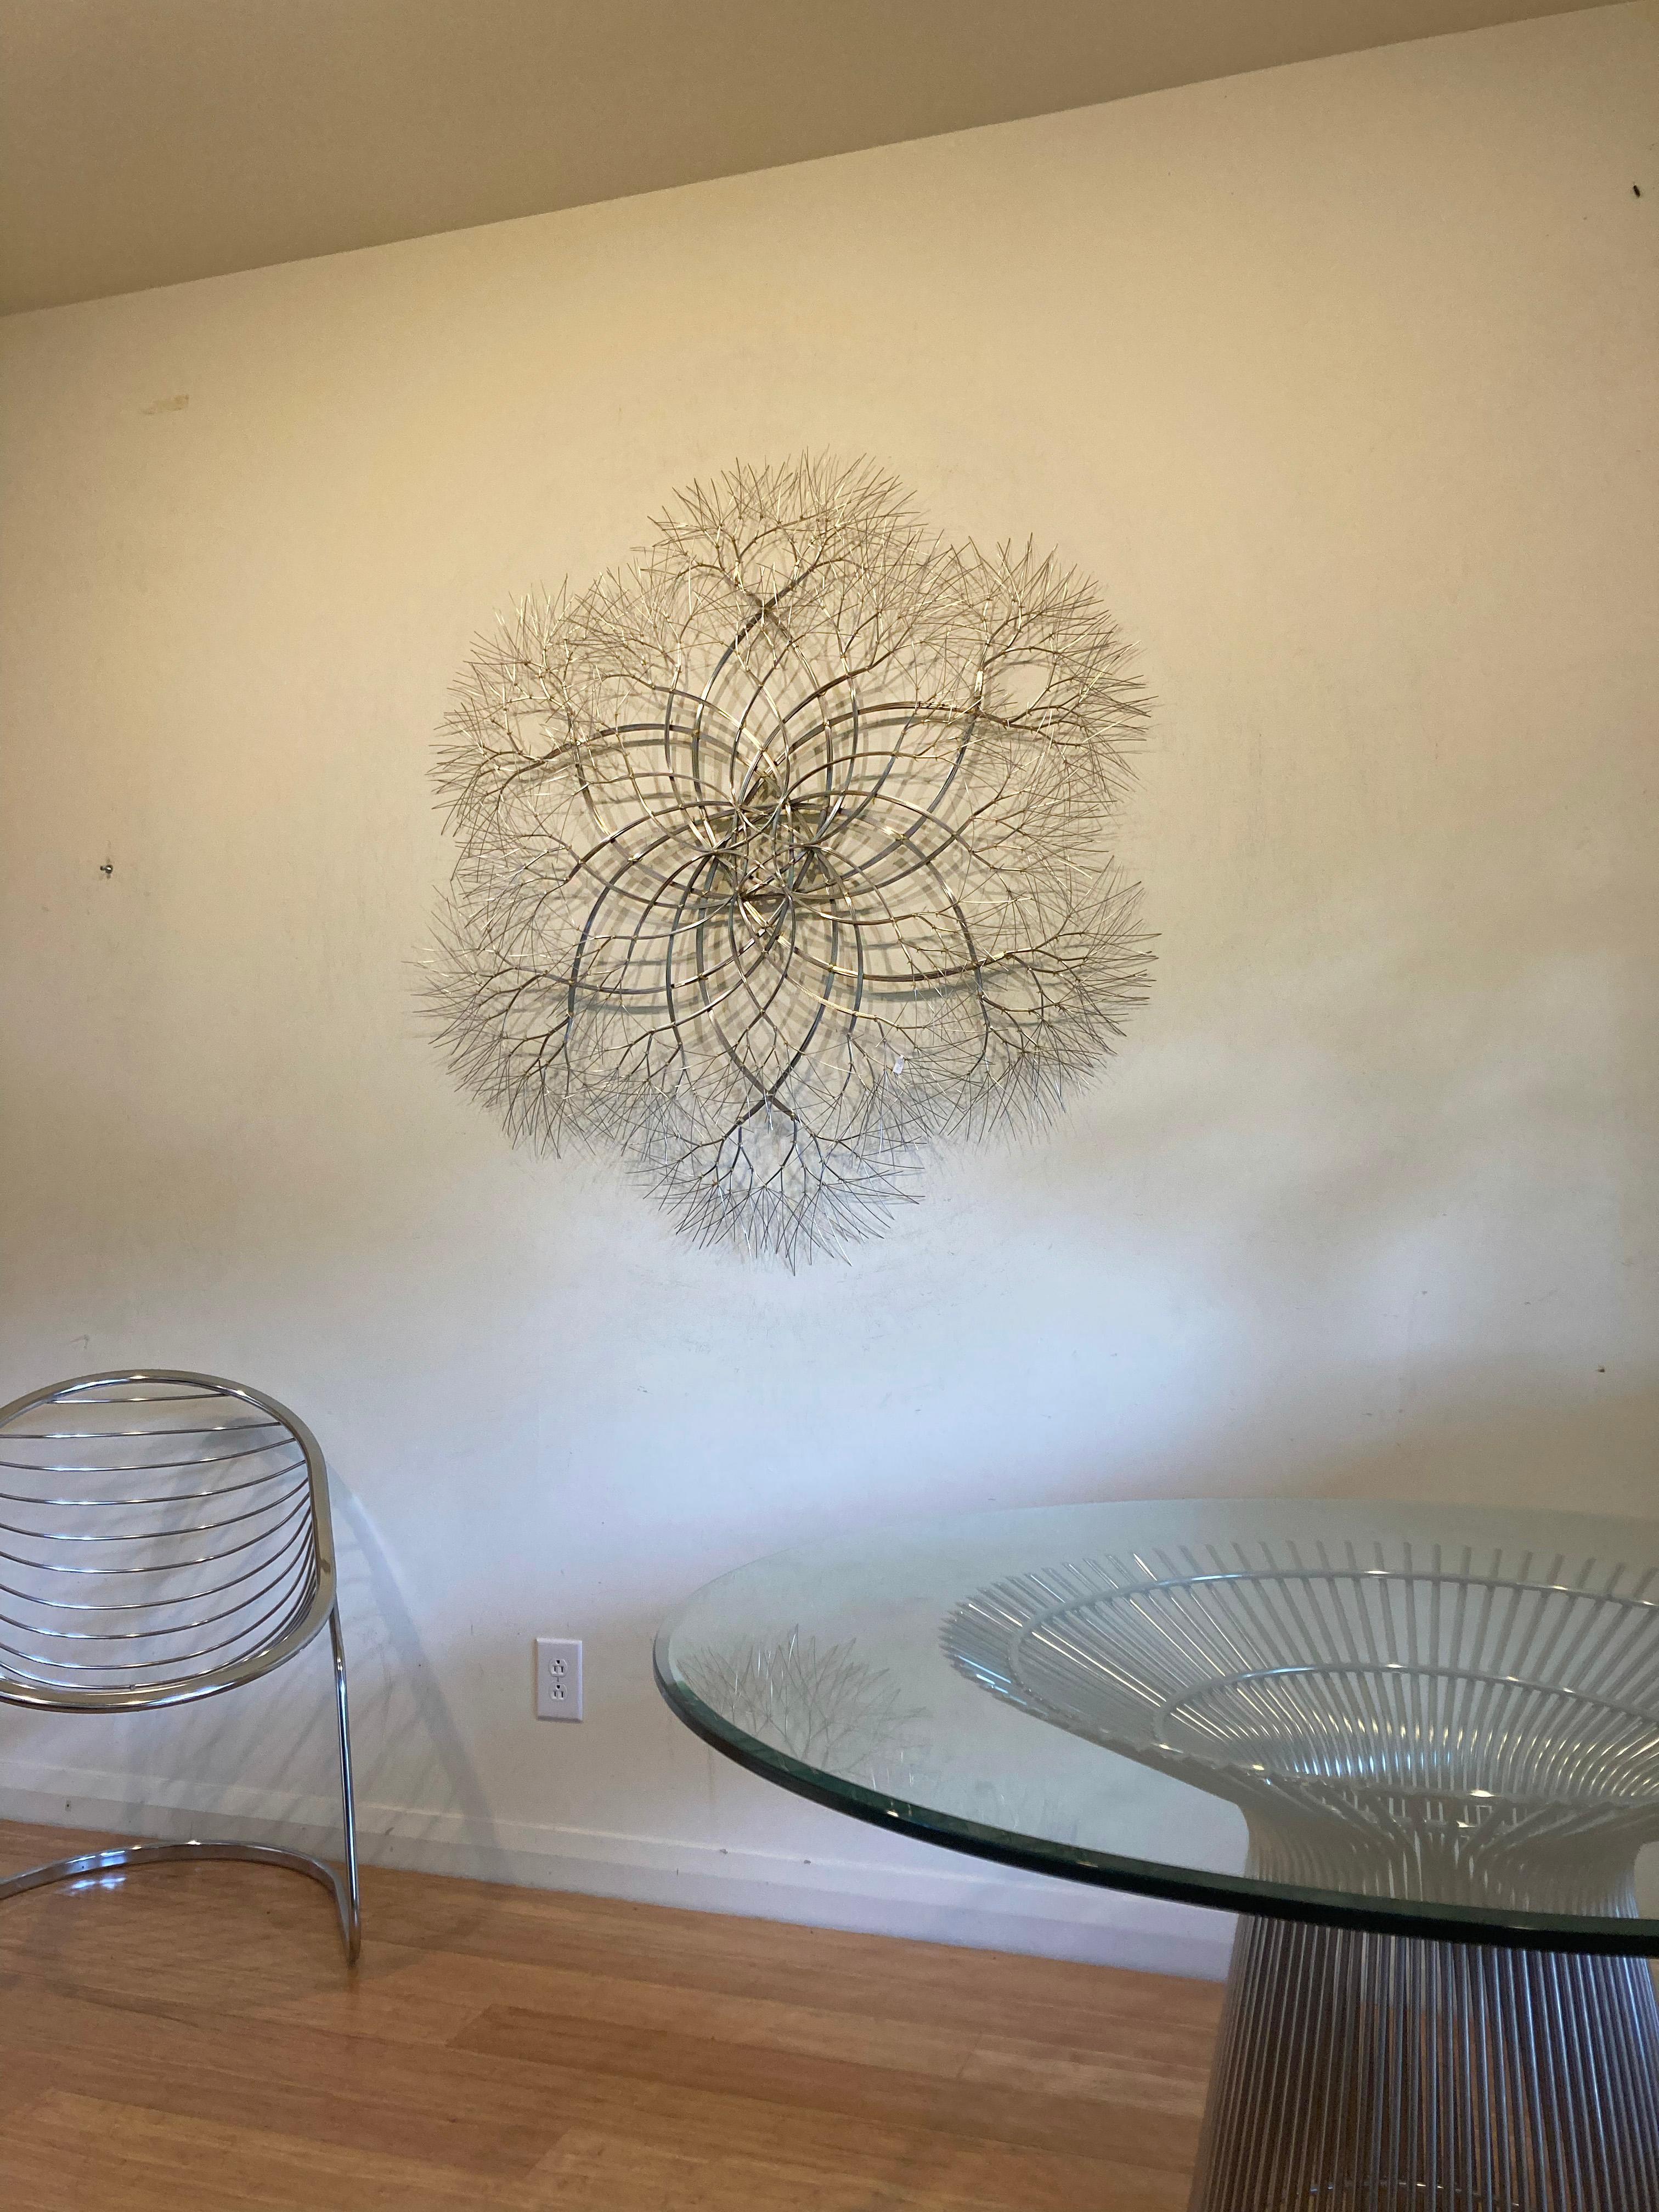 Stainless steel. 

This abstract wall art by Kue King is created using stainless steel wire. Kue uses an aesthetic reminiscent of trees, electricity, and light to create sculptures of peace and beauty. Adults and children alike see snowflakes,